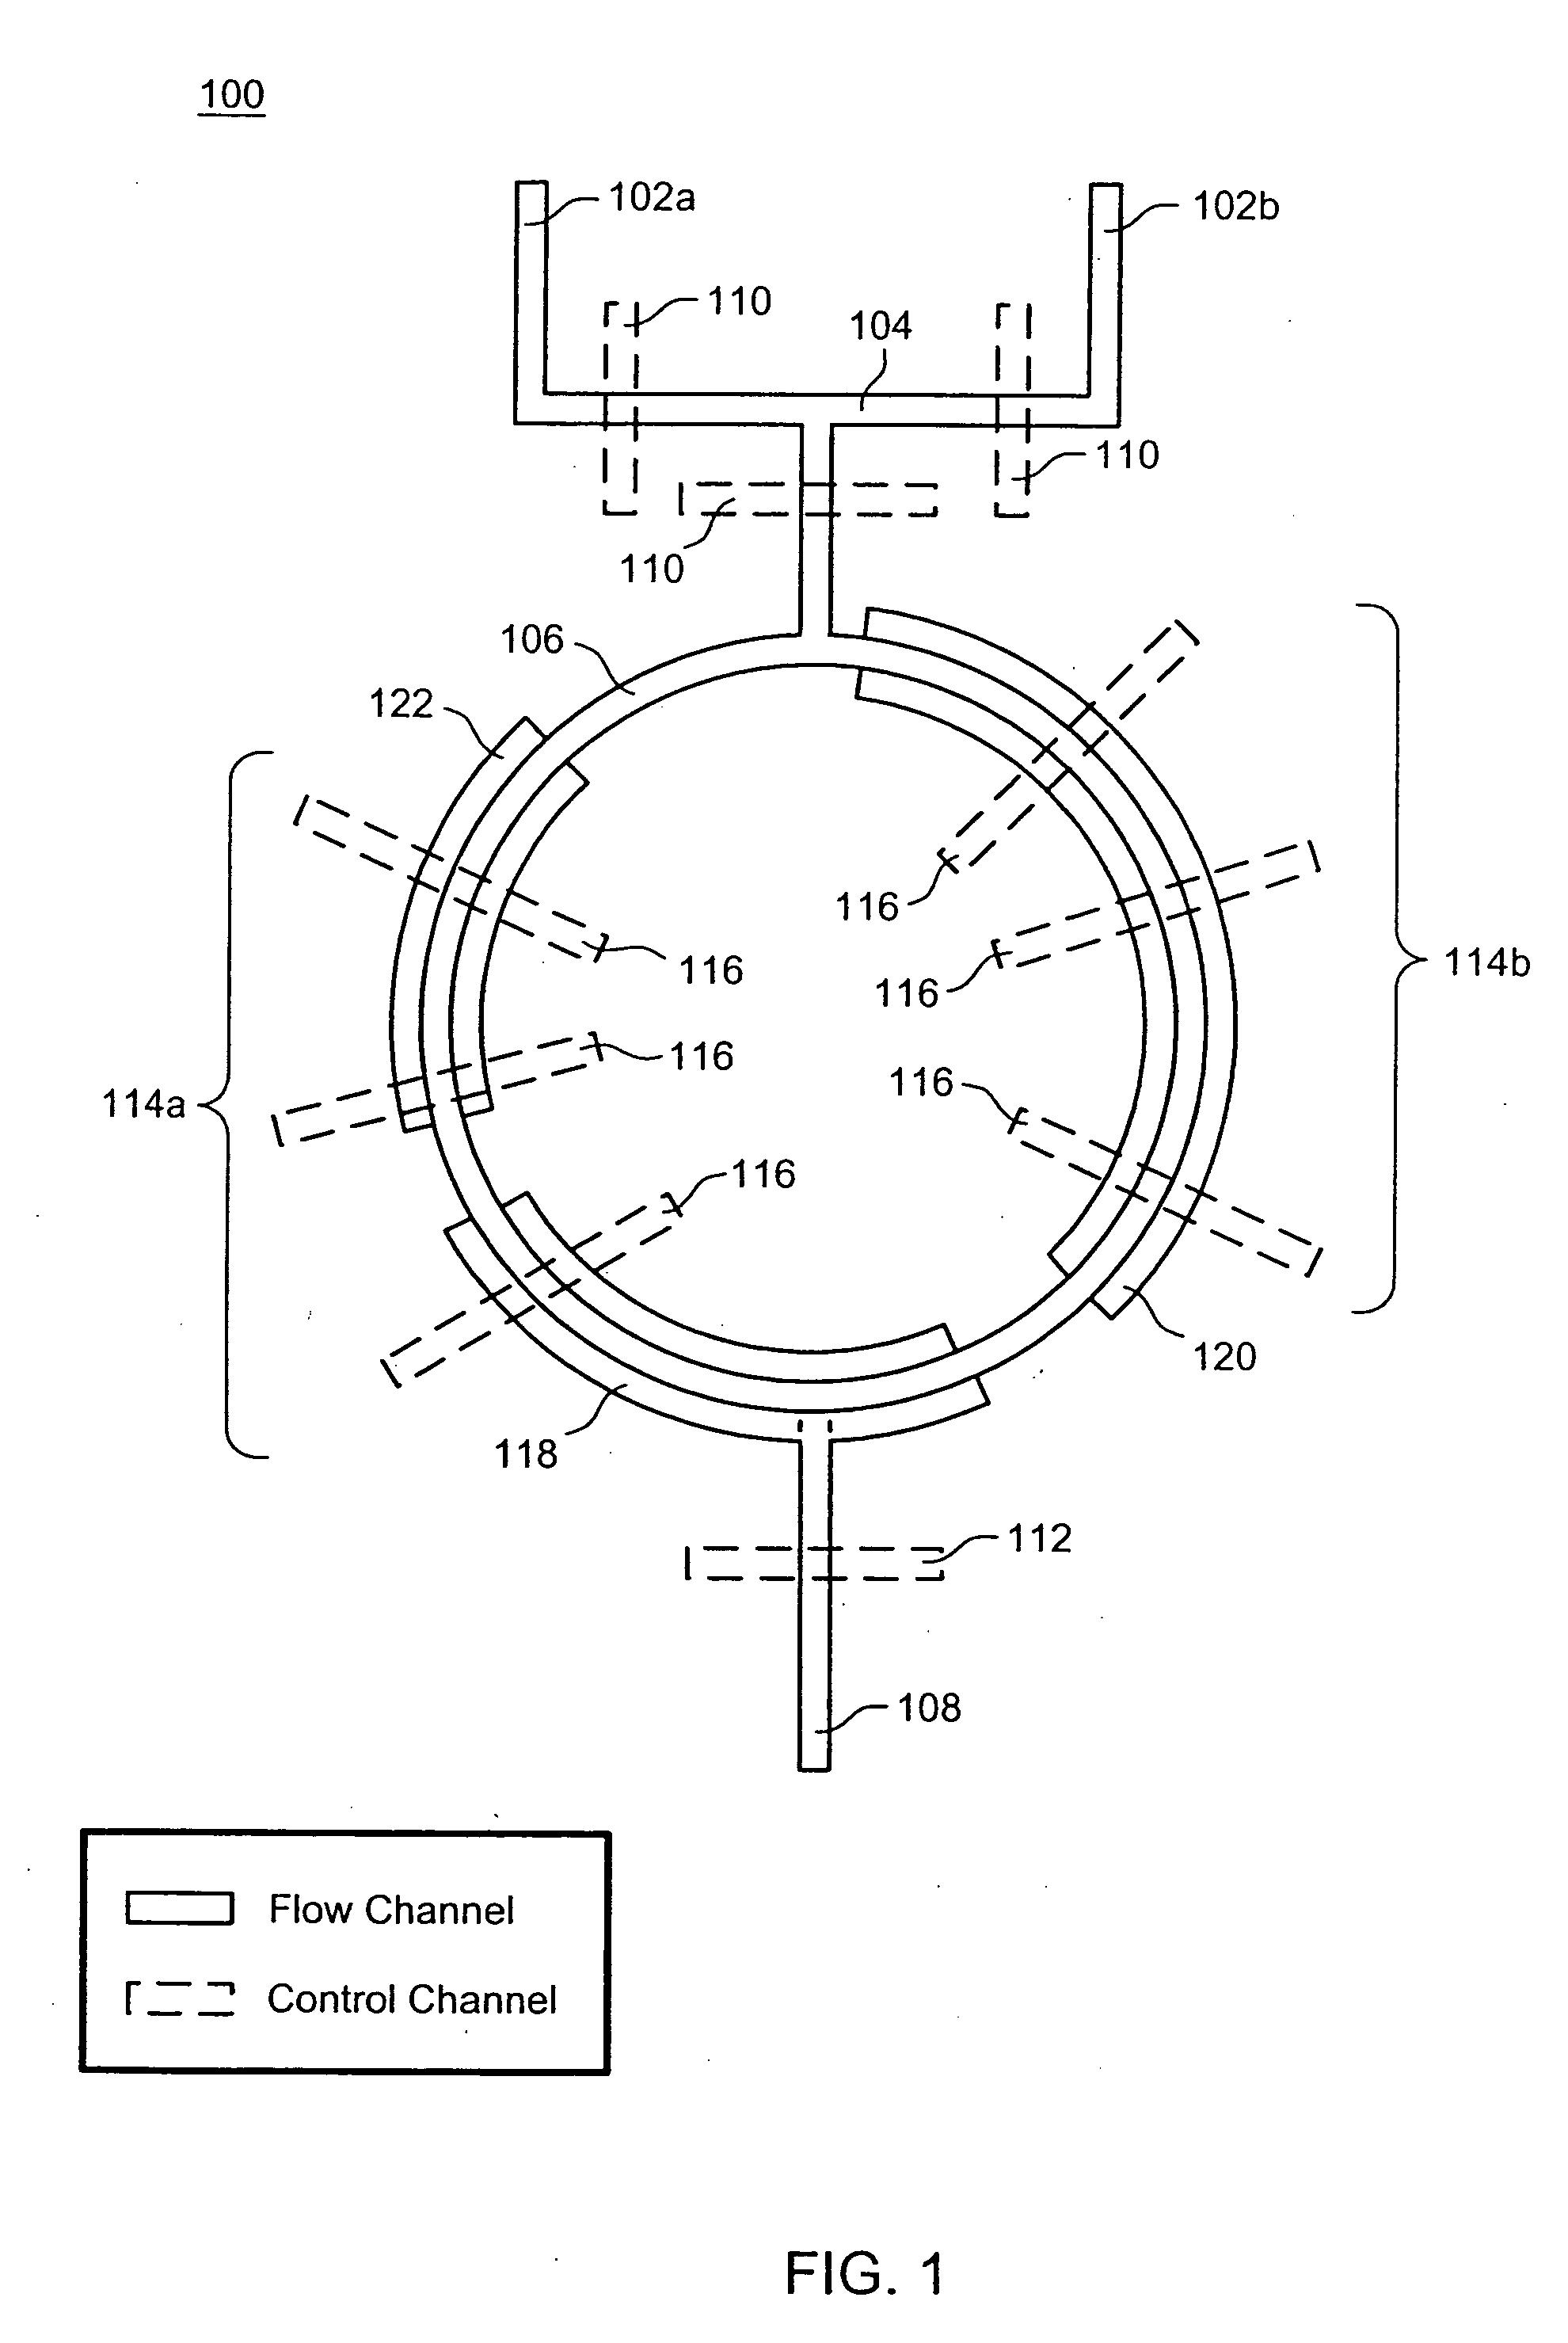 Nucleic acid amplification using microfluidic devices